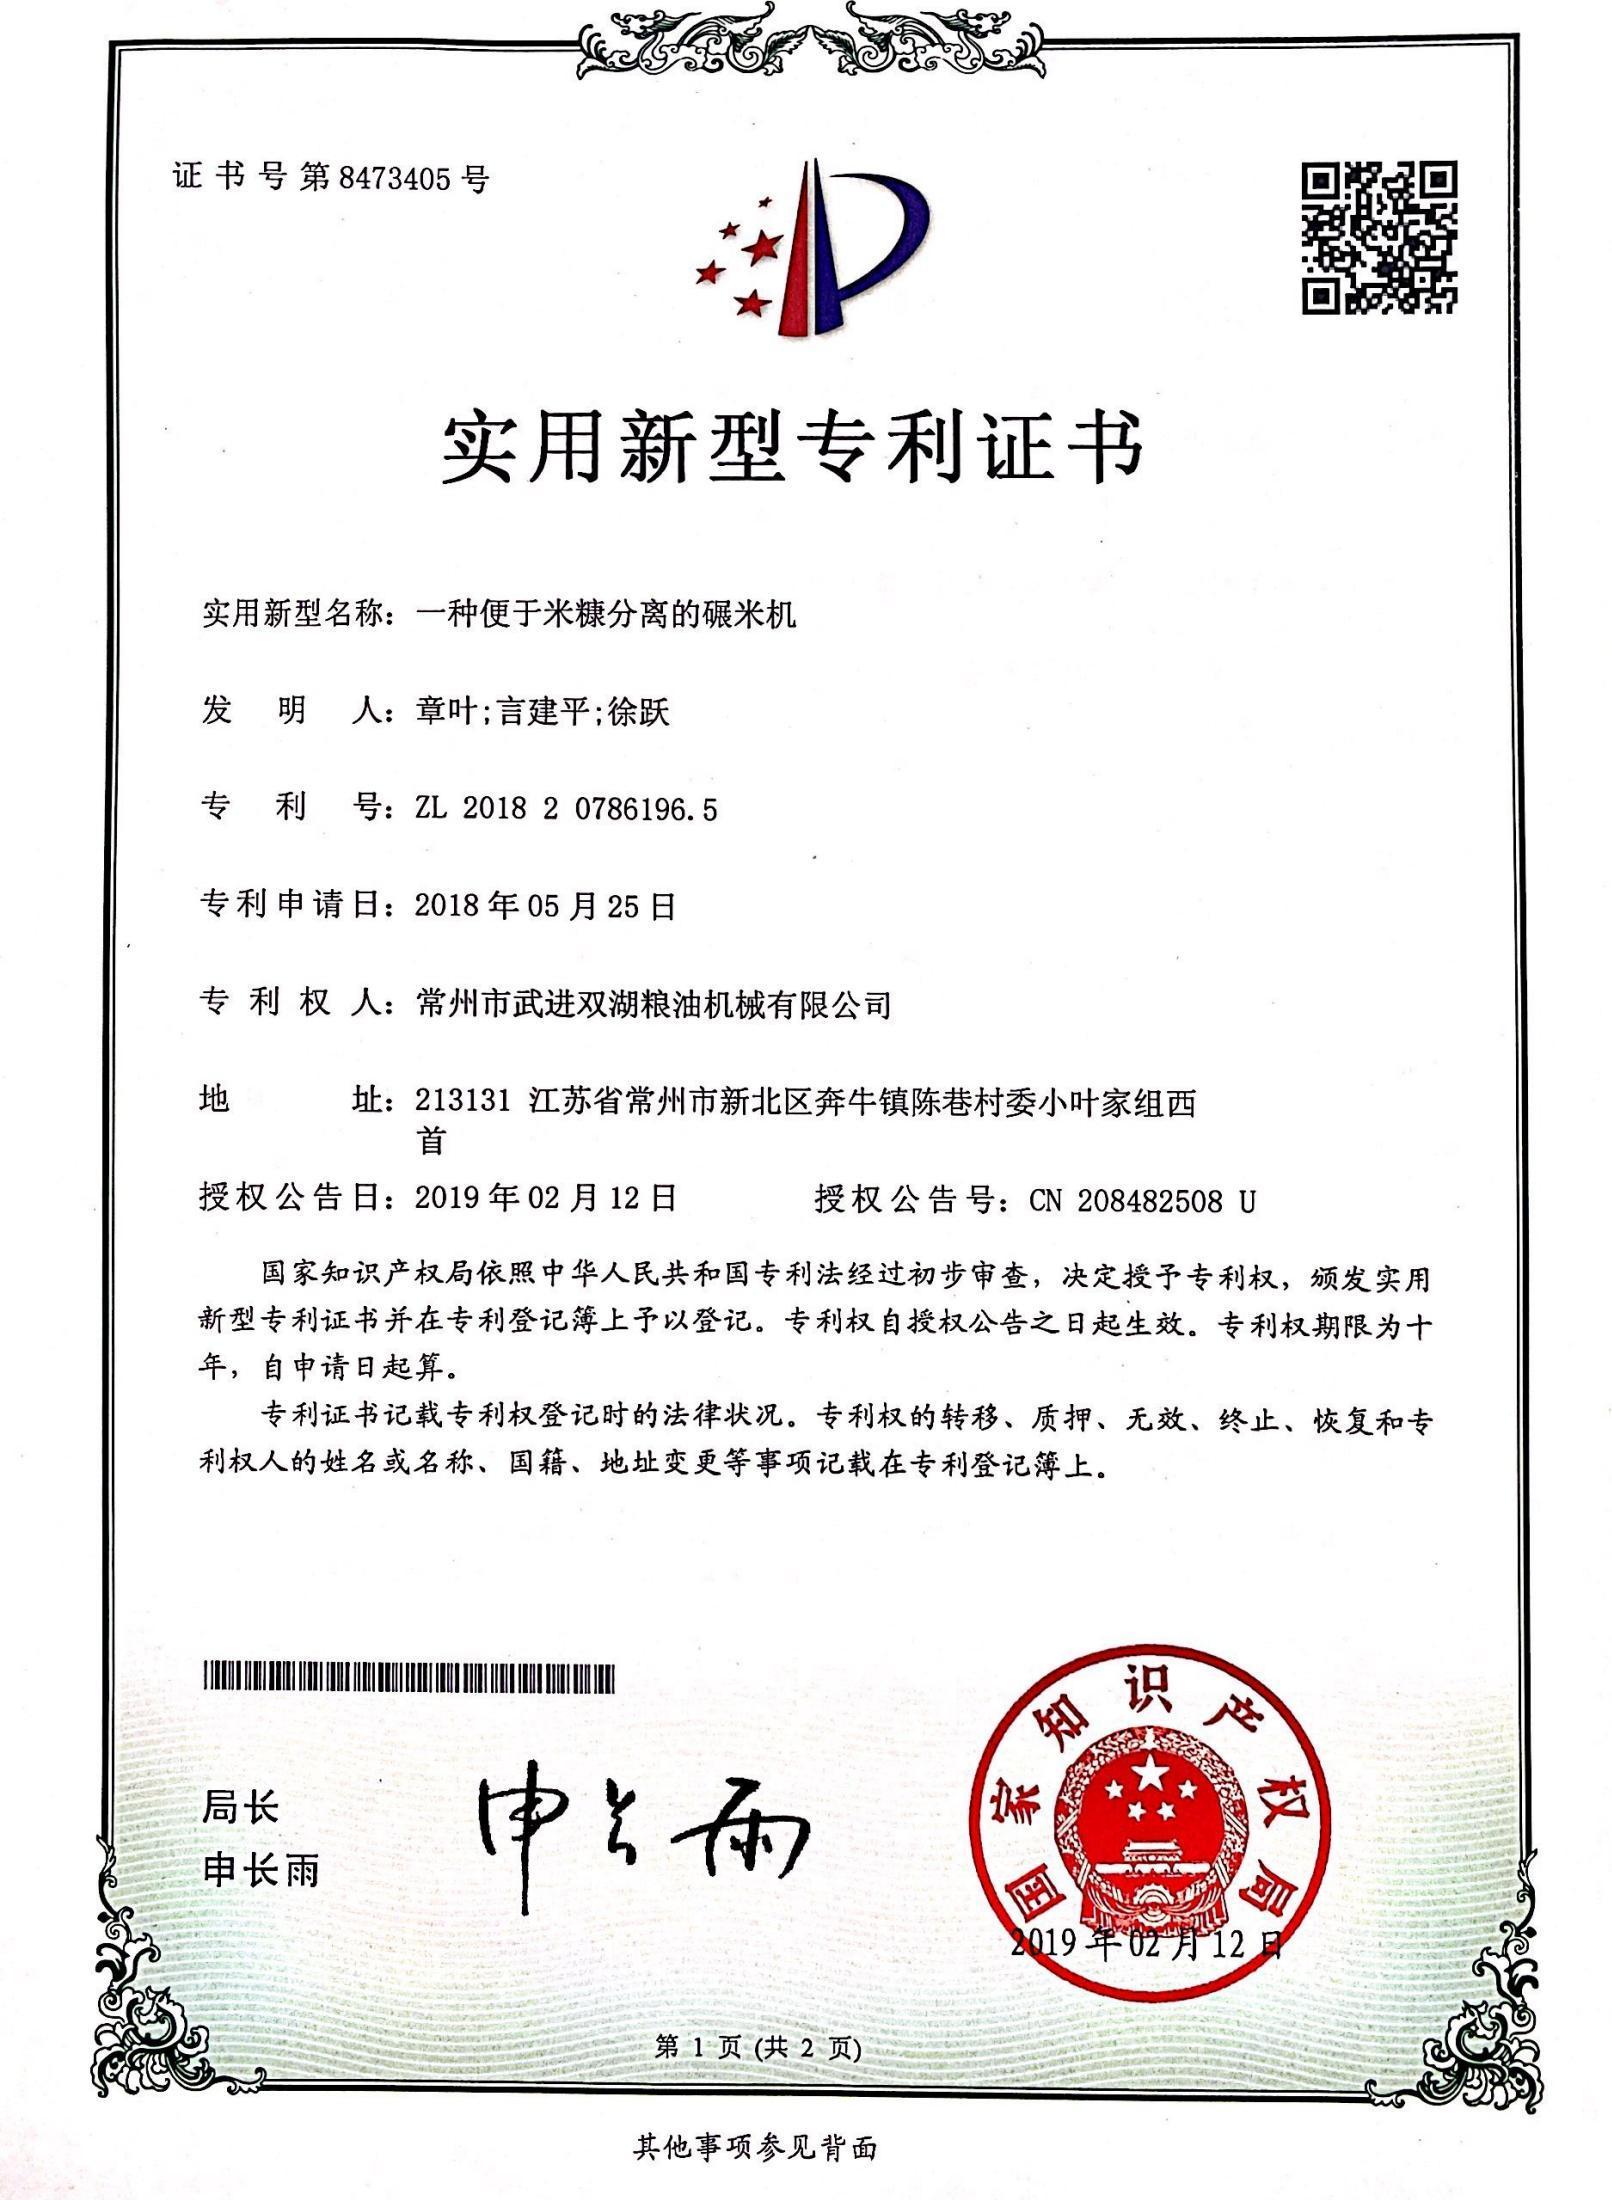 Patent certificate of rice mill for easy separation of rice bran